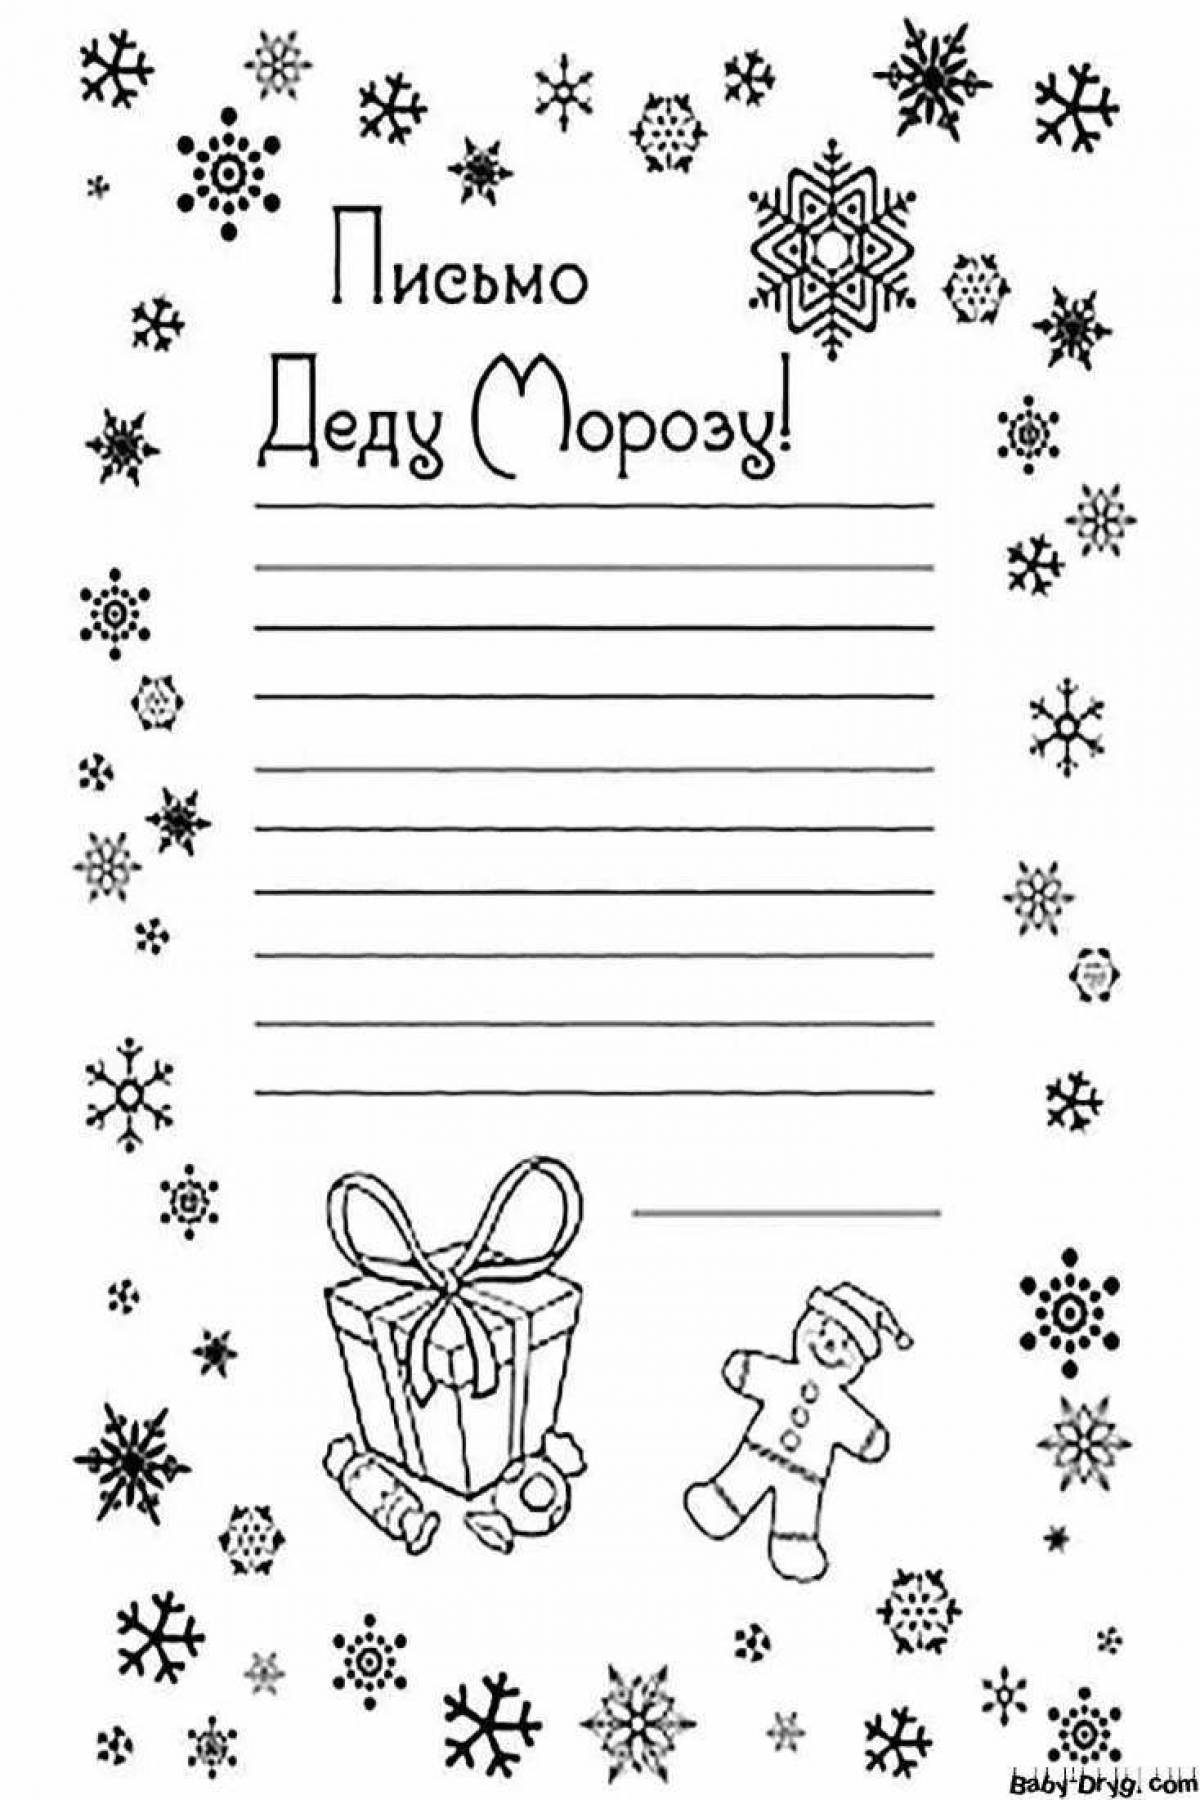 Bright coloring letter template to Santa Claus